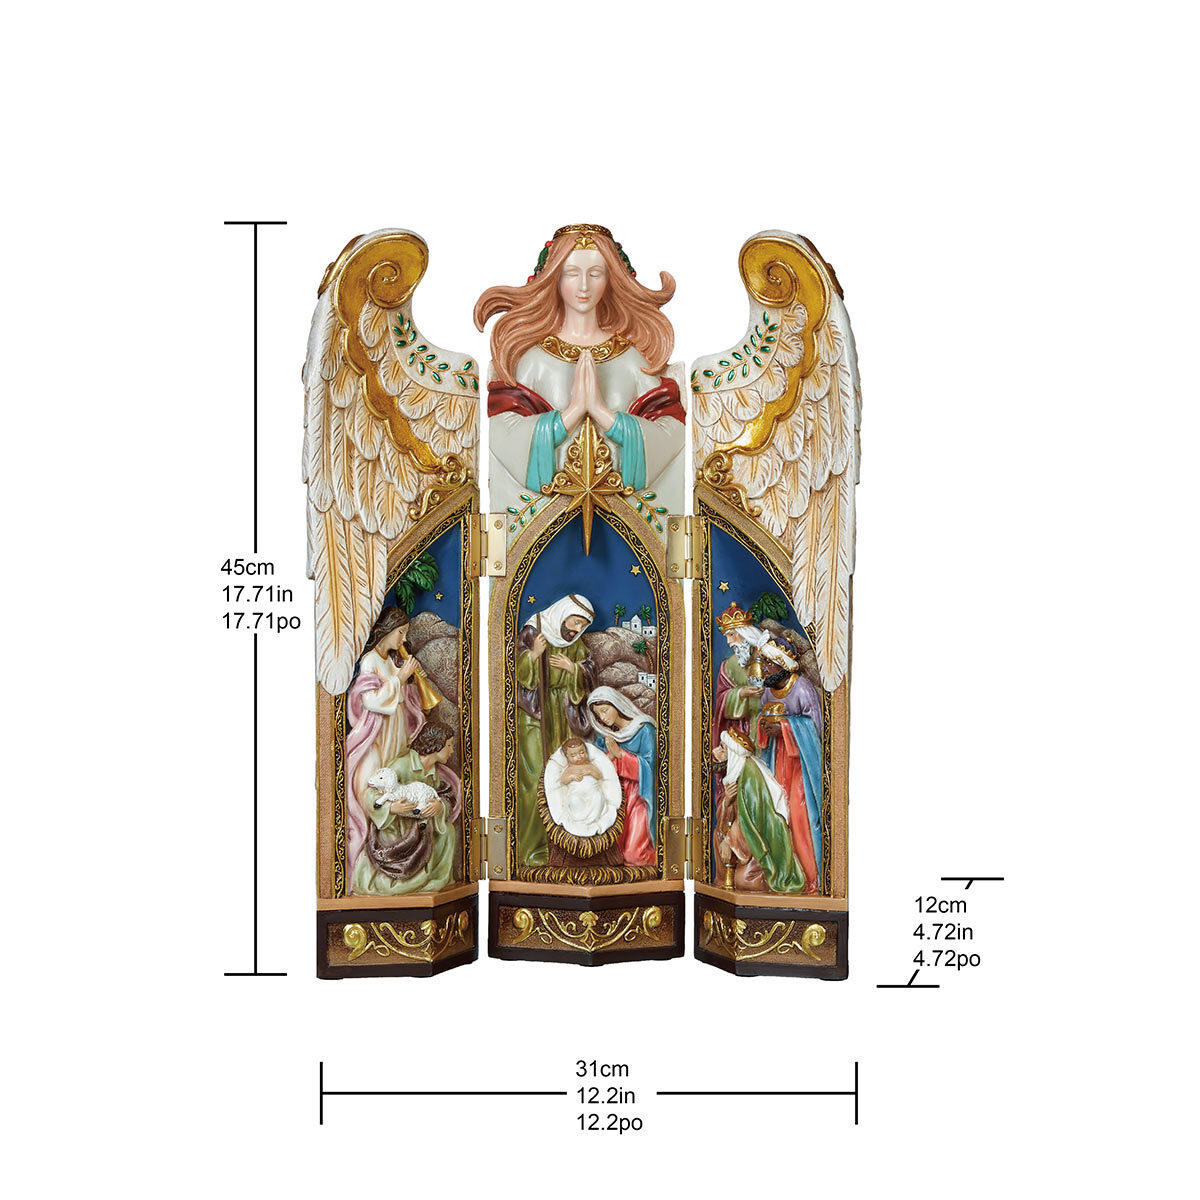 Buy Holy Family Folding Angel Dimensions Image at Costco.co.uk